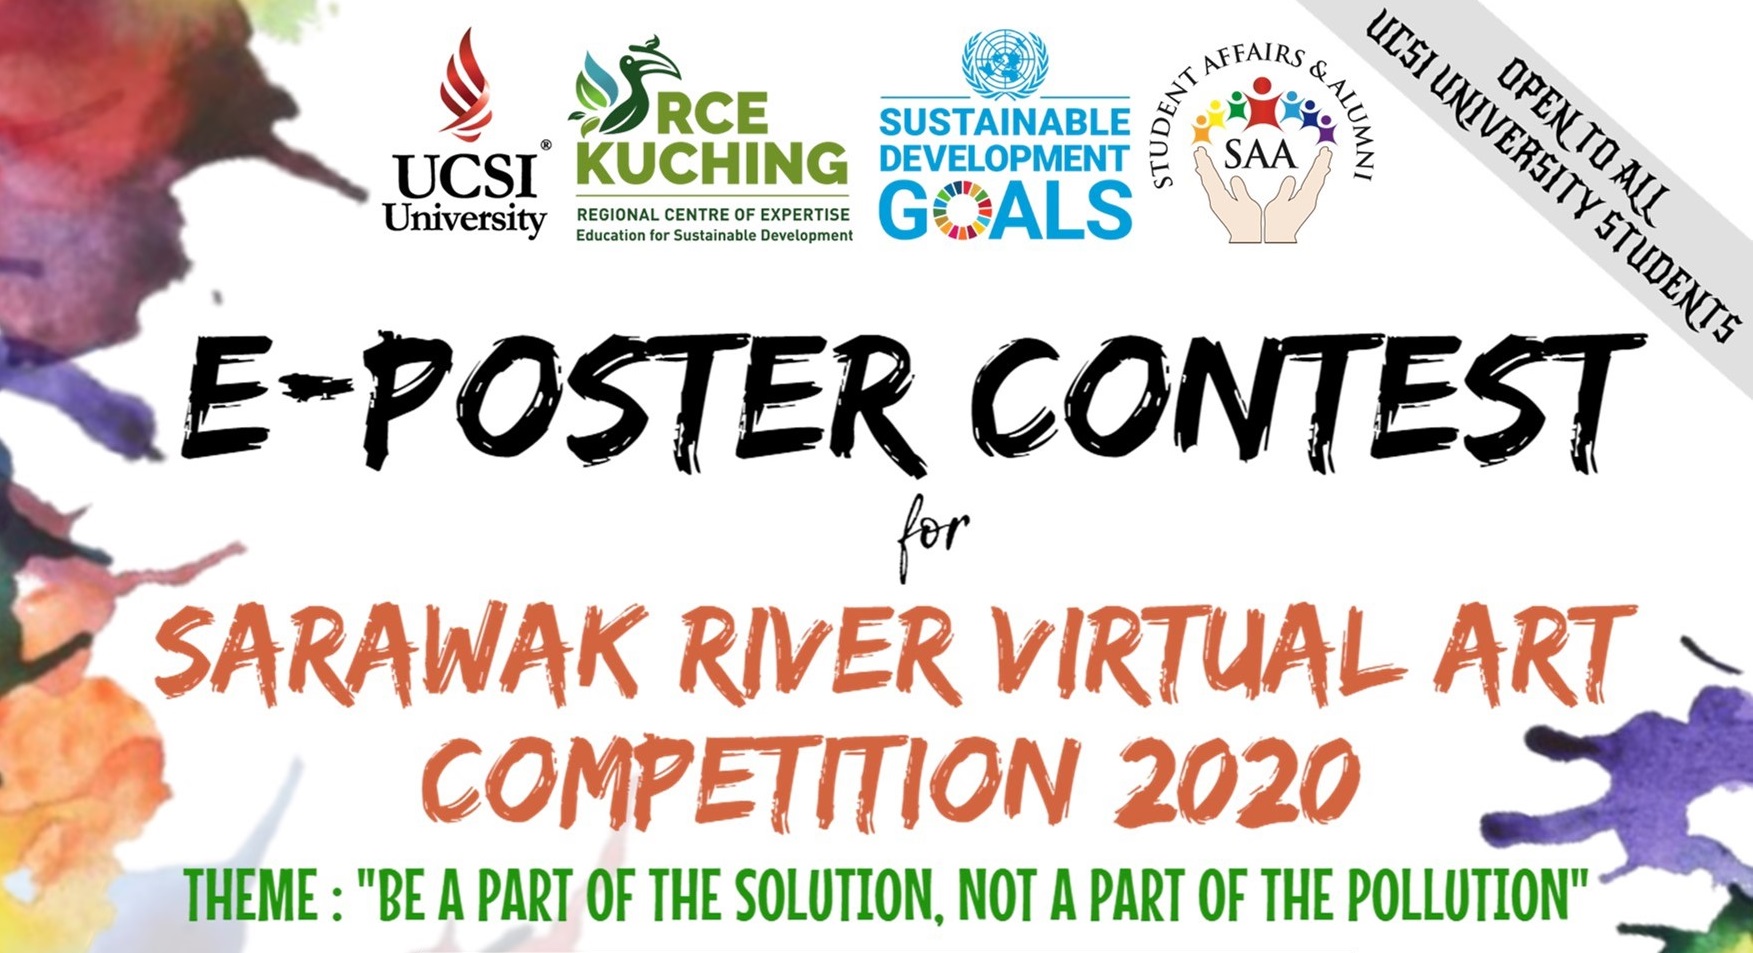 You are currently viewing Sarawak River Virtual Art Competition – E-Poster Contest 2020